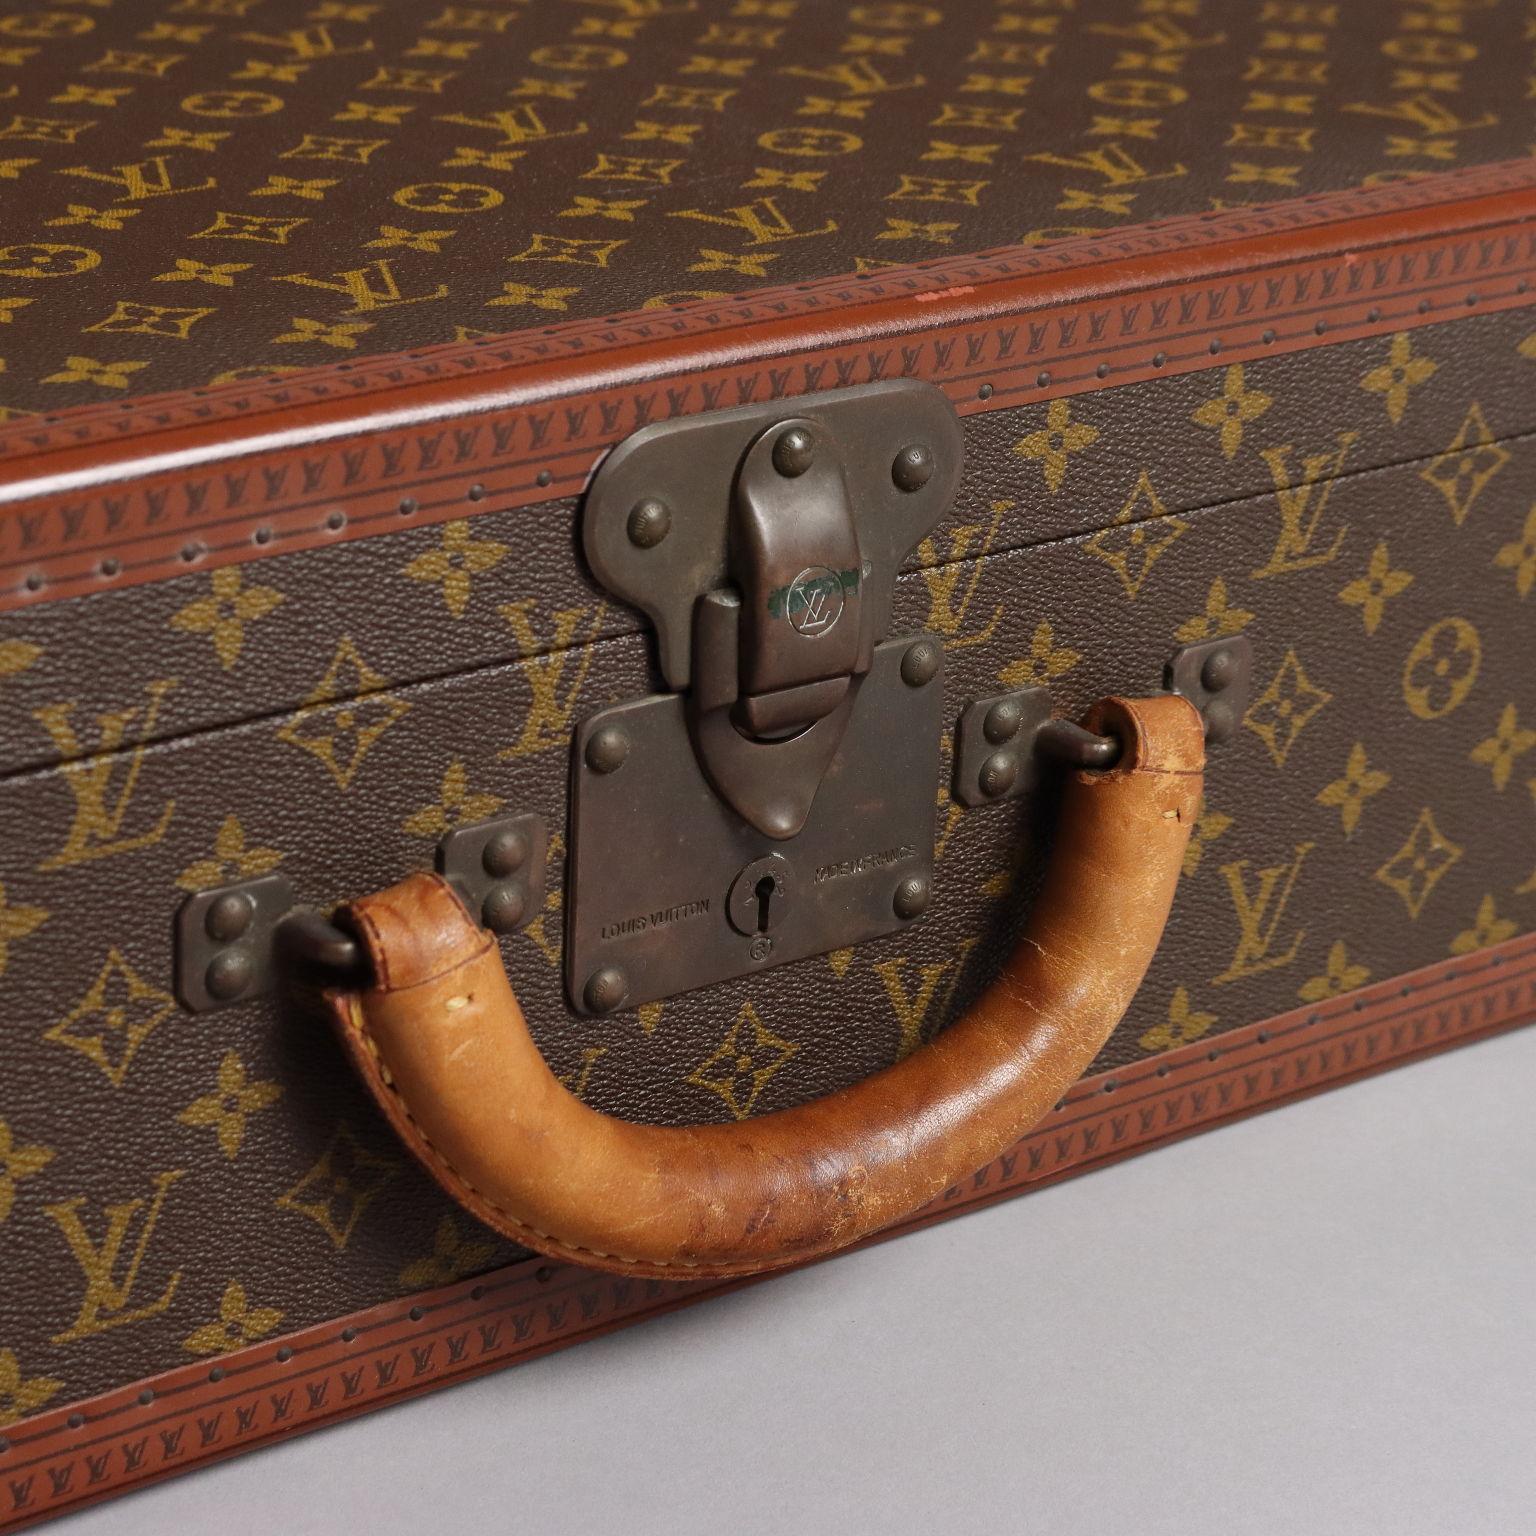 Louis Vuitton model Bisten 80 hard suitcase in the iconic monogram canvas, dating from the 1970s. The interior is lined and the handles rounded with leather; the corners are brass and the edges are lozine, a very durable volcanic fiber. Serratura a